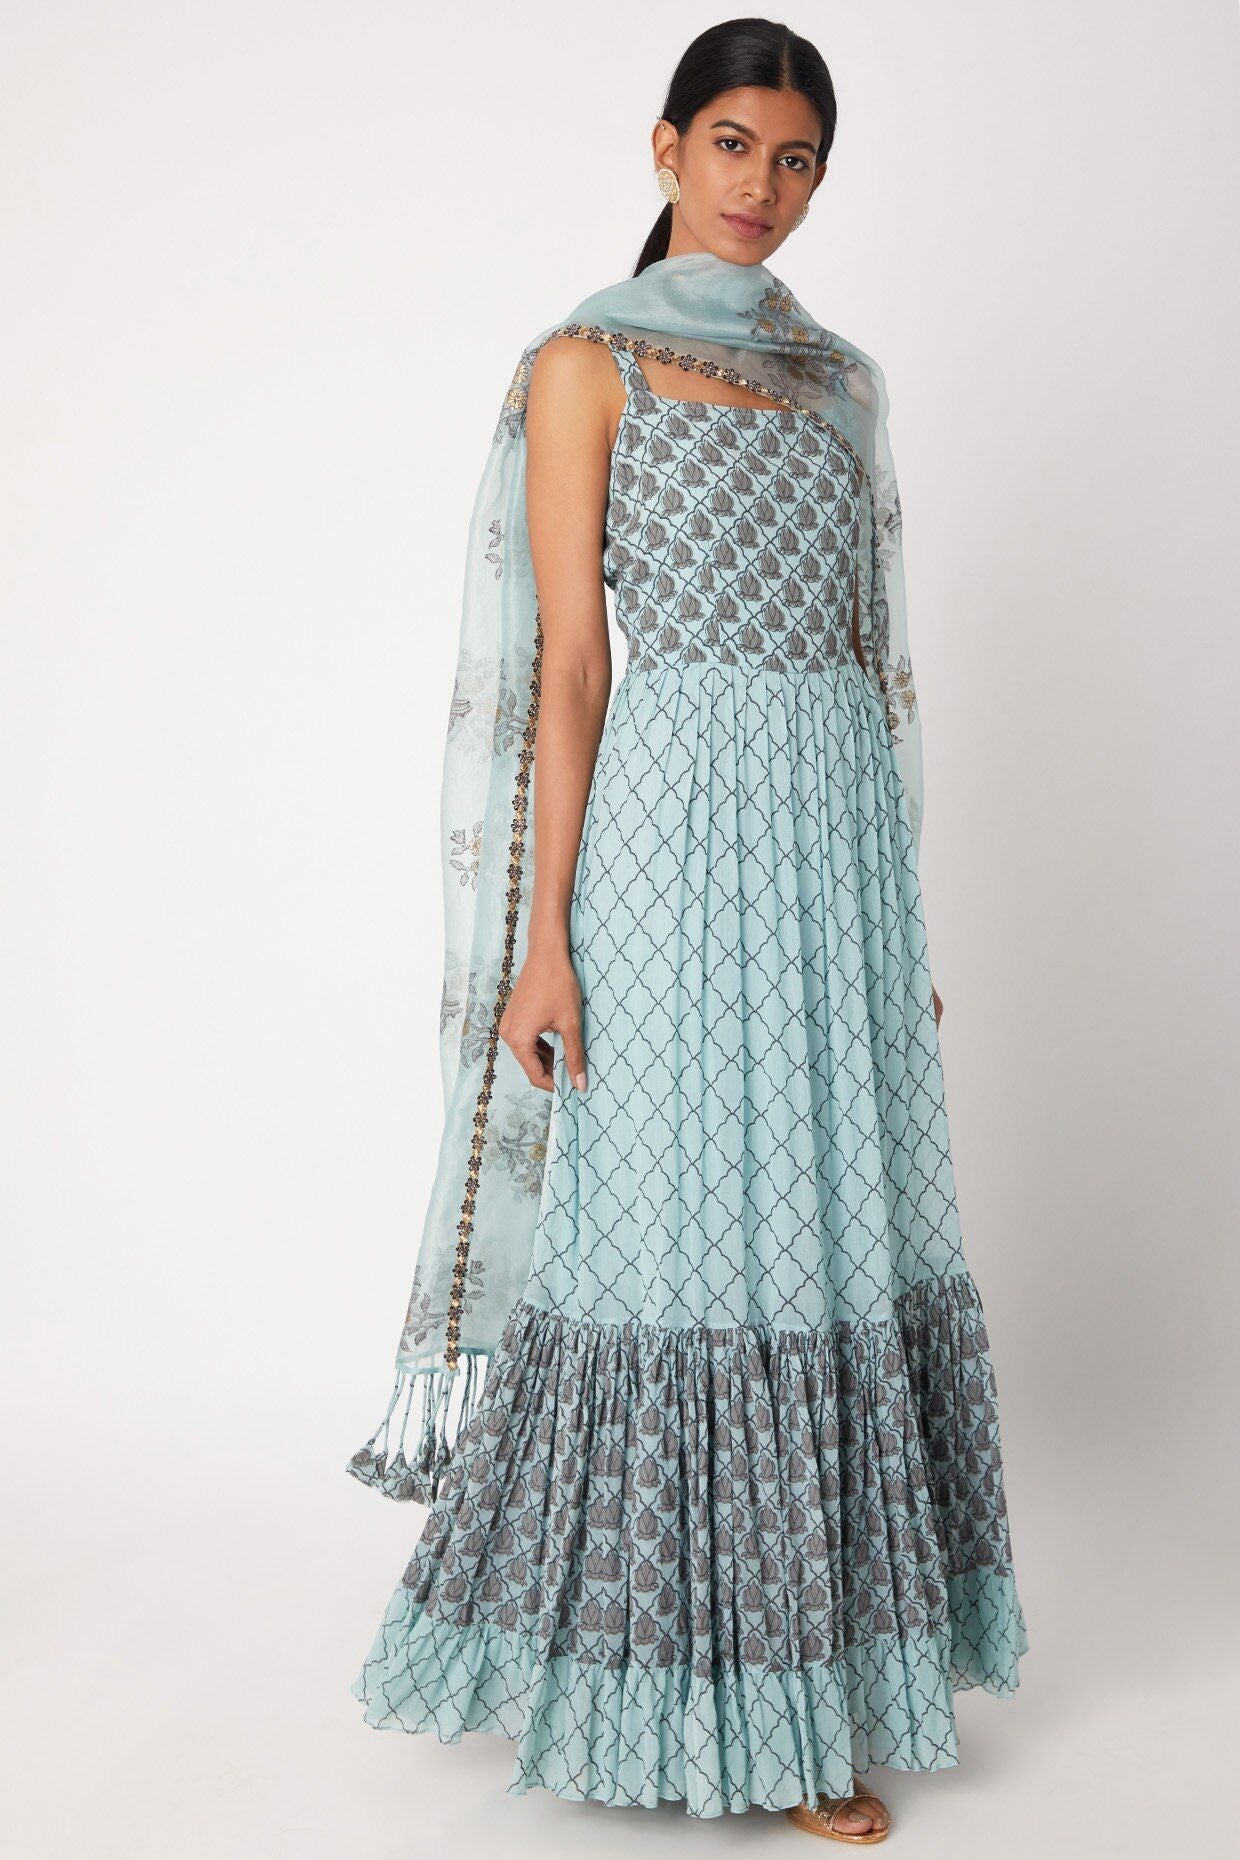 Sky Blue Ruffled Anarkali - Indian Clothing in Denver, CO, Aurora, CO, Boulder, CO, Fort Collins, CO, Colorado Springs, CO, Parker, CO, Highlands Ranch, CO, Cherry Creek, CO, Centennial, CO, and Longmont, CO. Nationwide shipping USA - India Fashion X